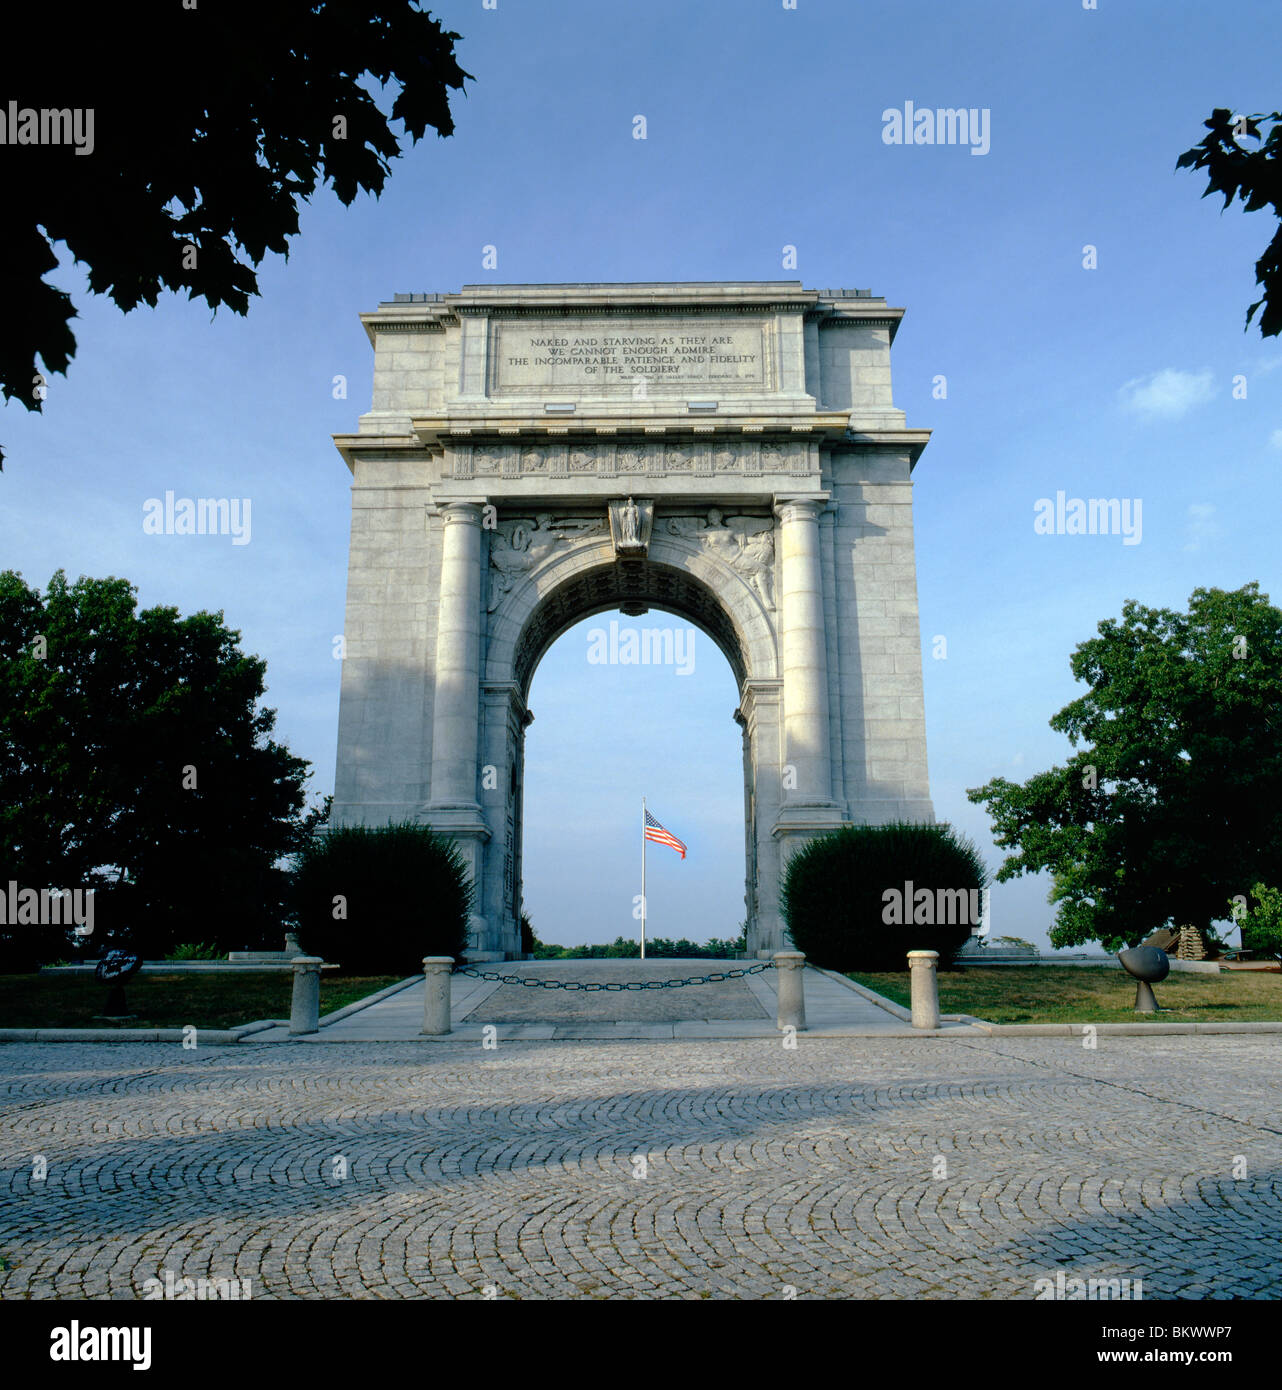 National Memorial Arch, Valley Forge National Historical Park, Valley Forge, Pennsylvania, USA Stockfoto